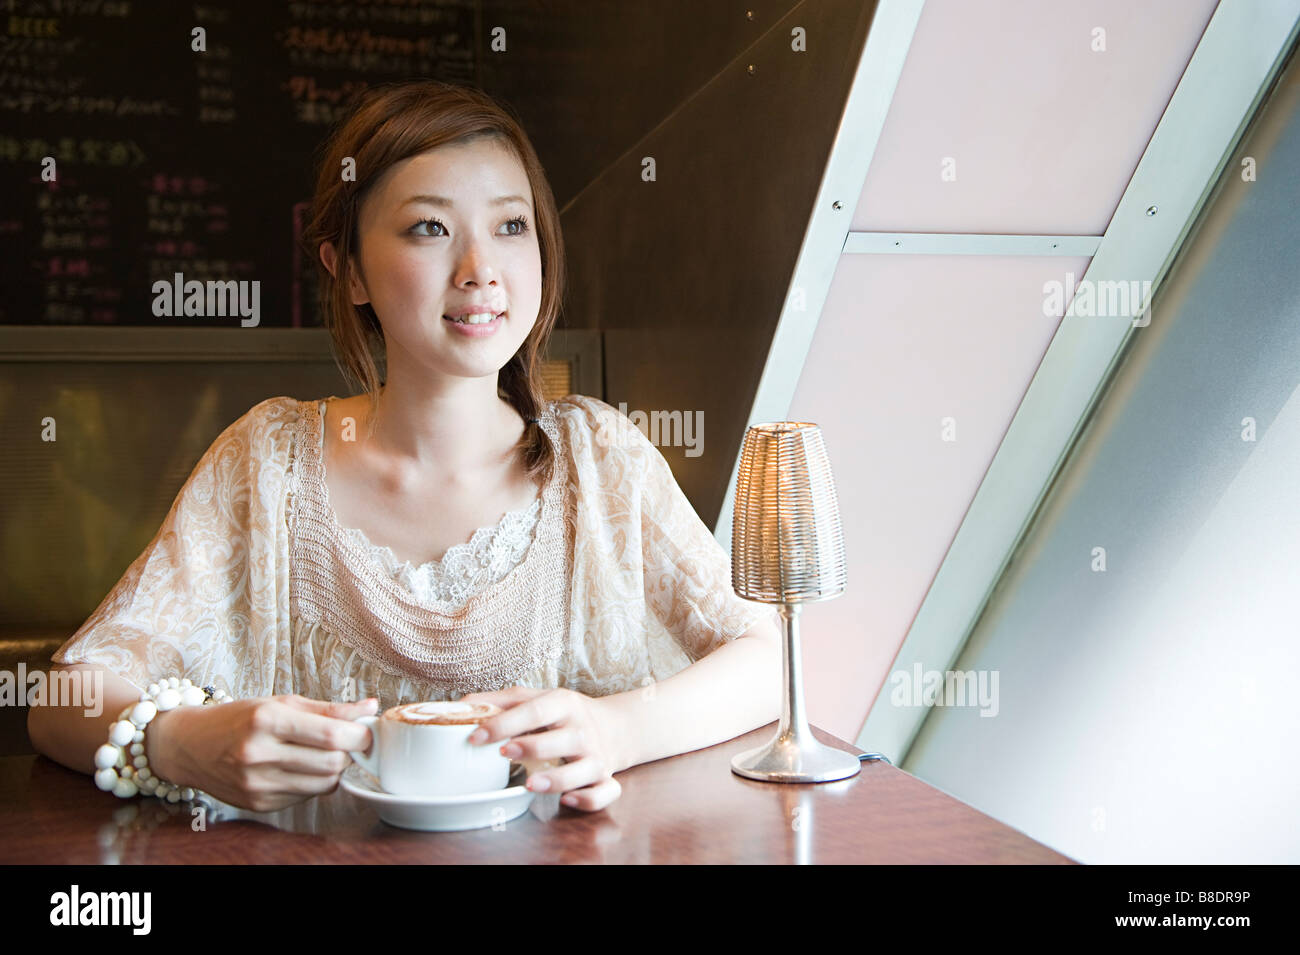 Young woman having coffee Banque D'Images